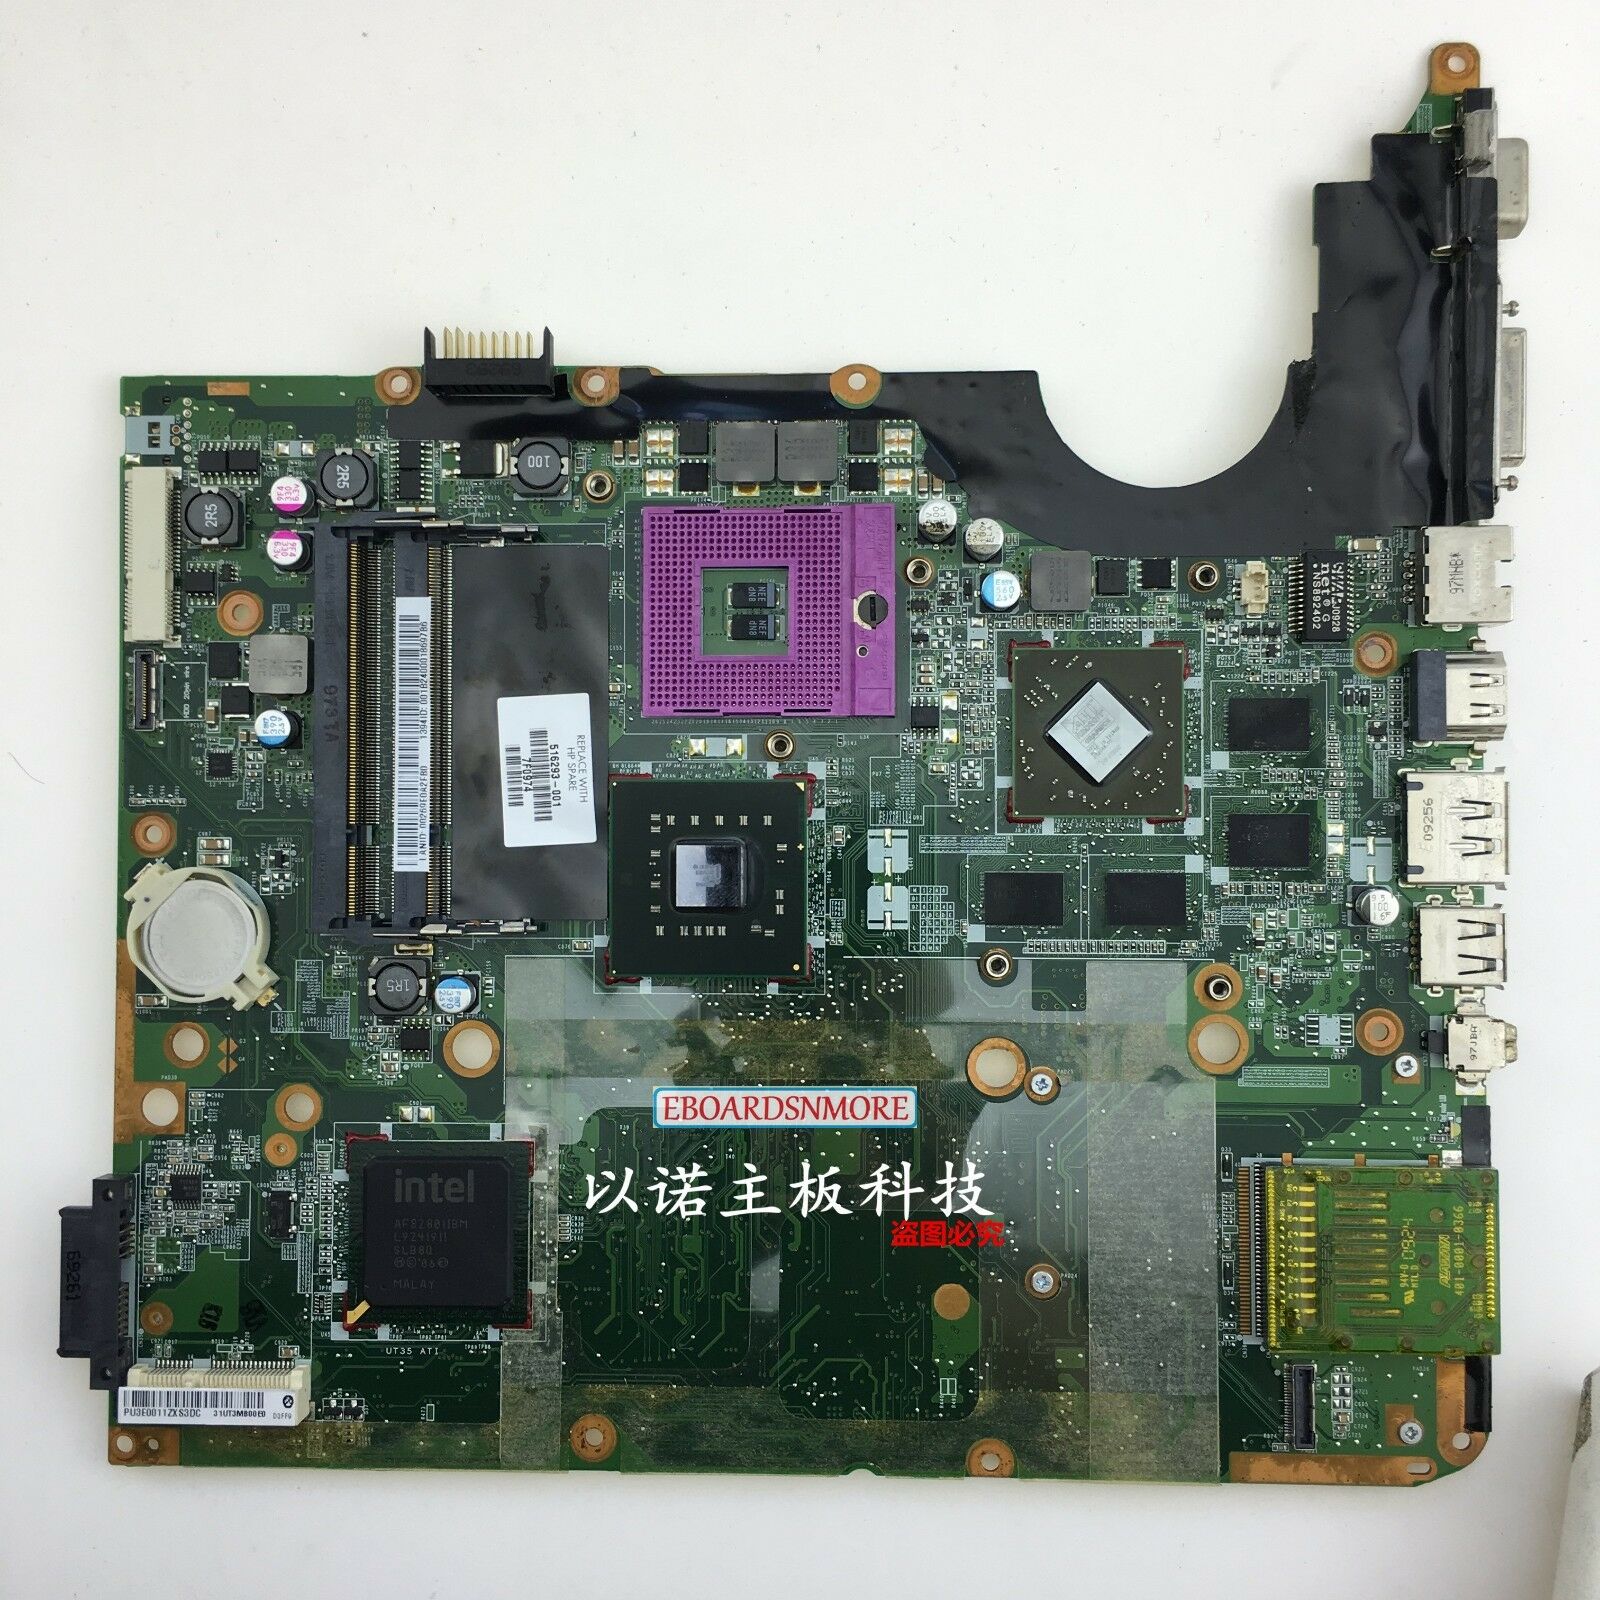 516293-001 INTEL PM45 DDR2 Motherboard for HP DV7 DV7-2000 Laptop, A Socket Type: See Description Number o - Click Image to Close